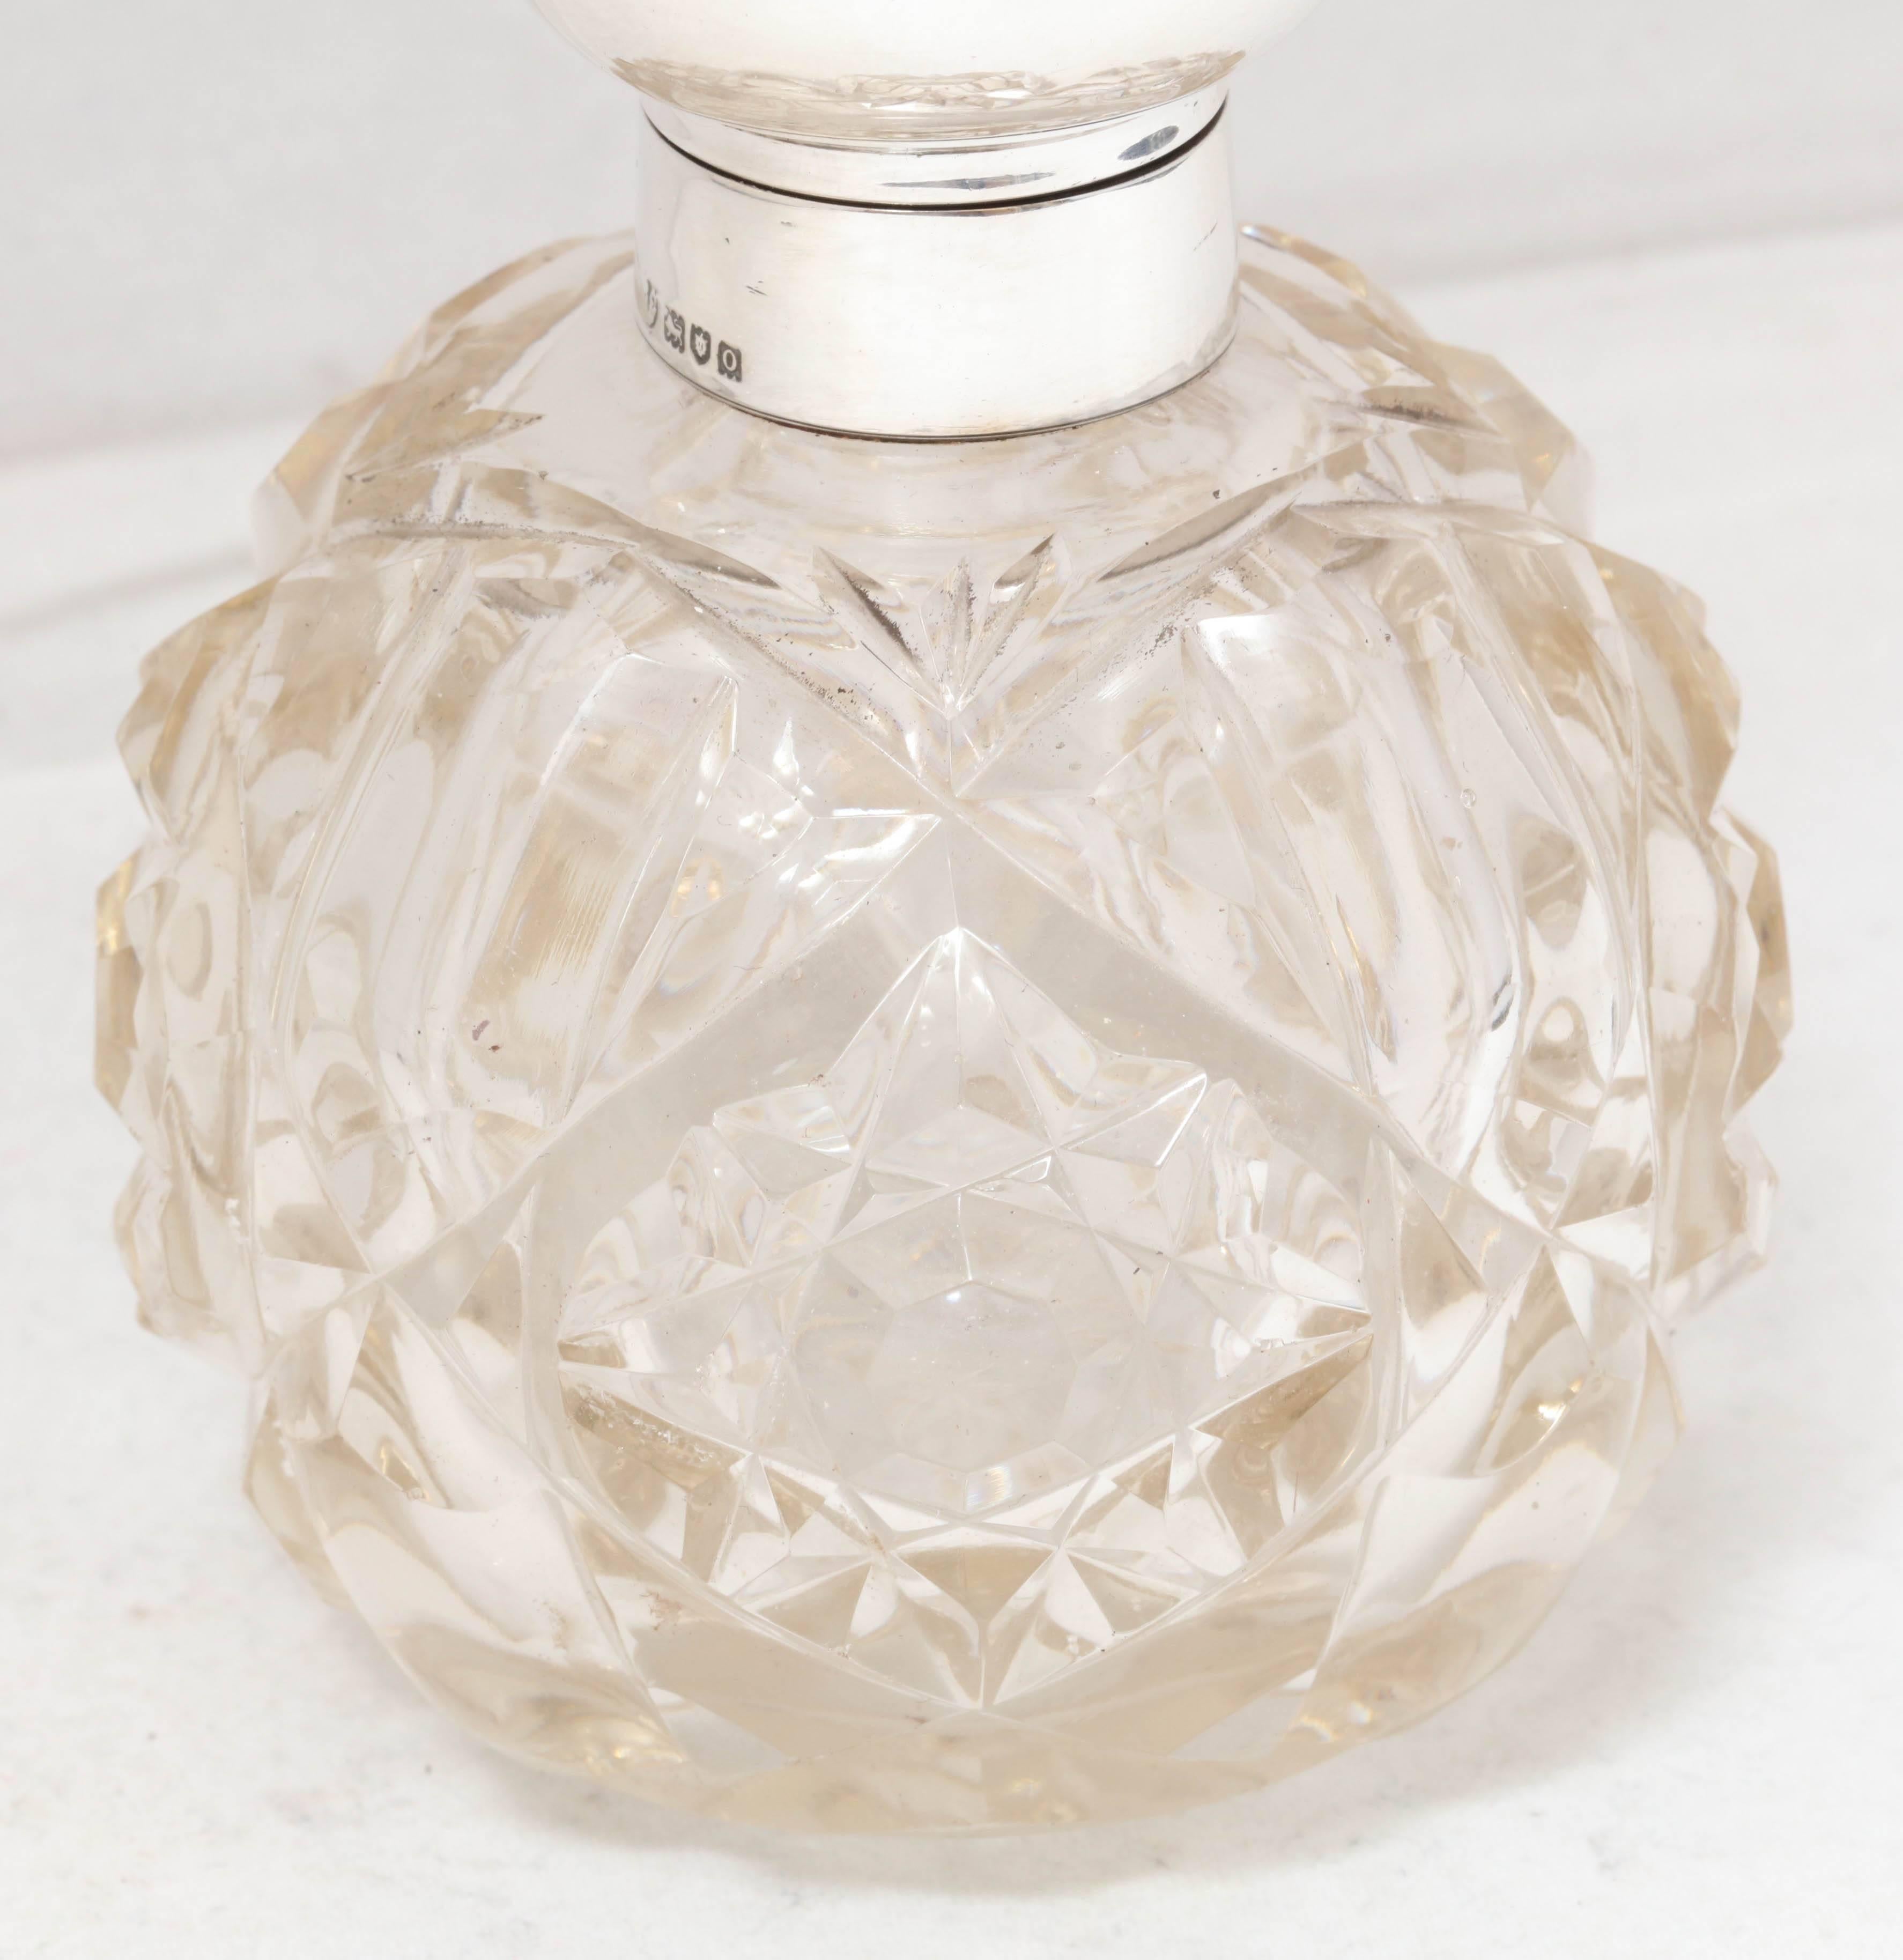  Edwardian Sterling Silver and Onyx-Mounted Cut Crystal Perfume Bottle For Sale 3